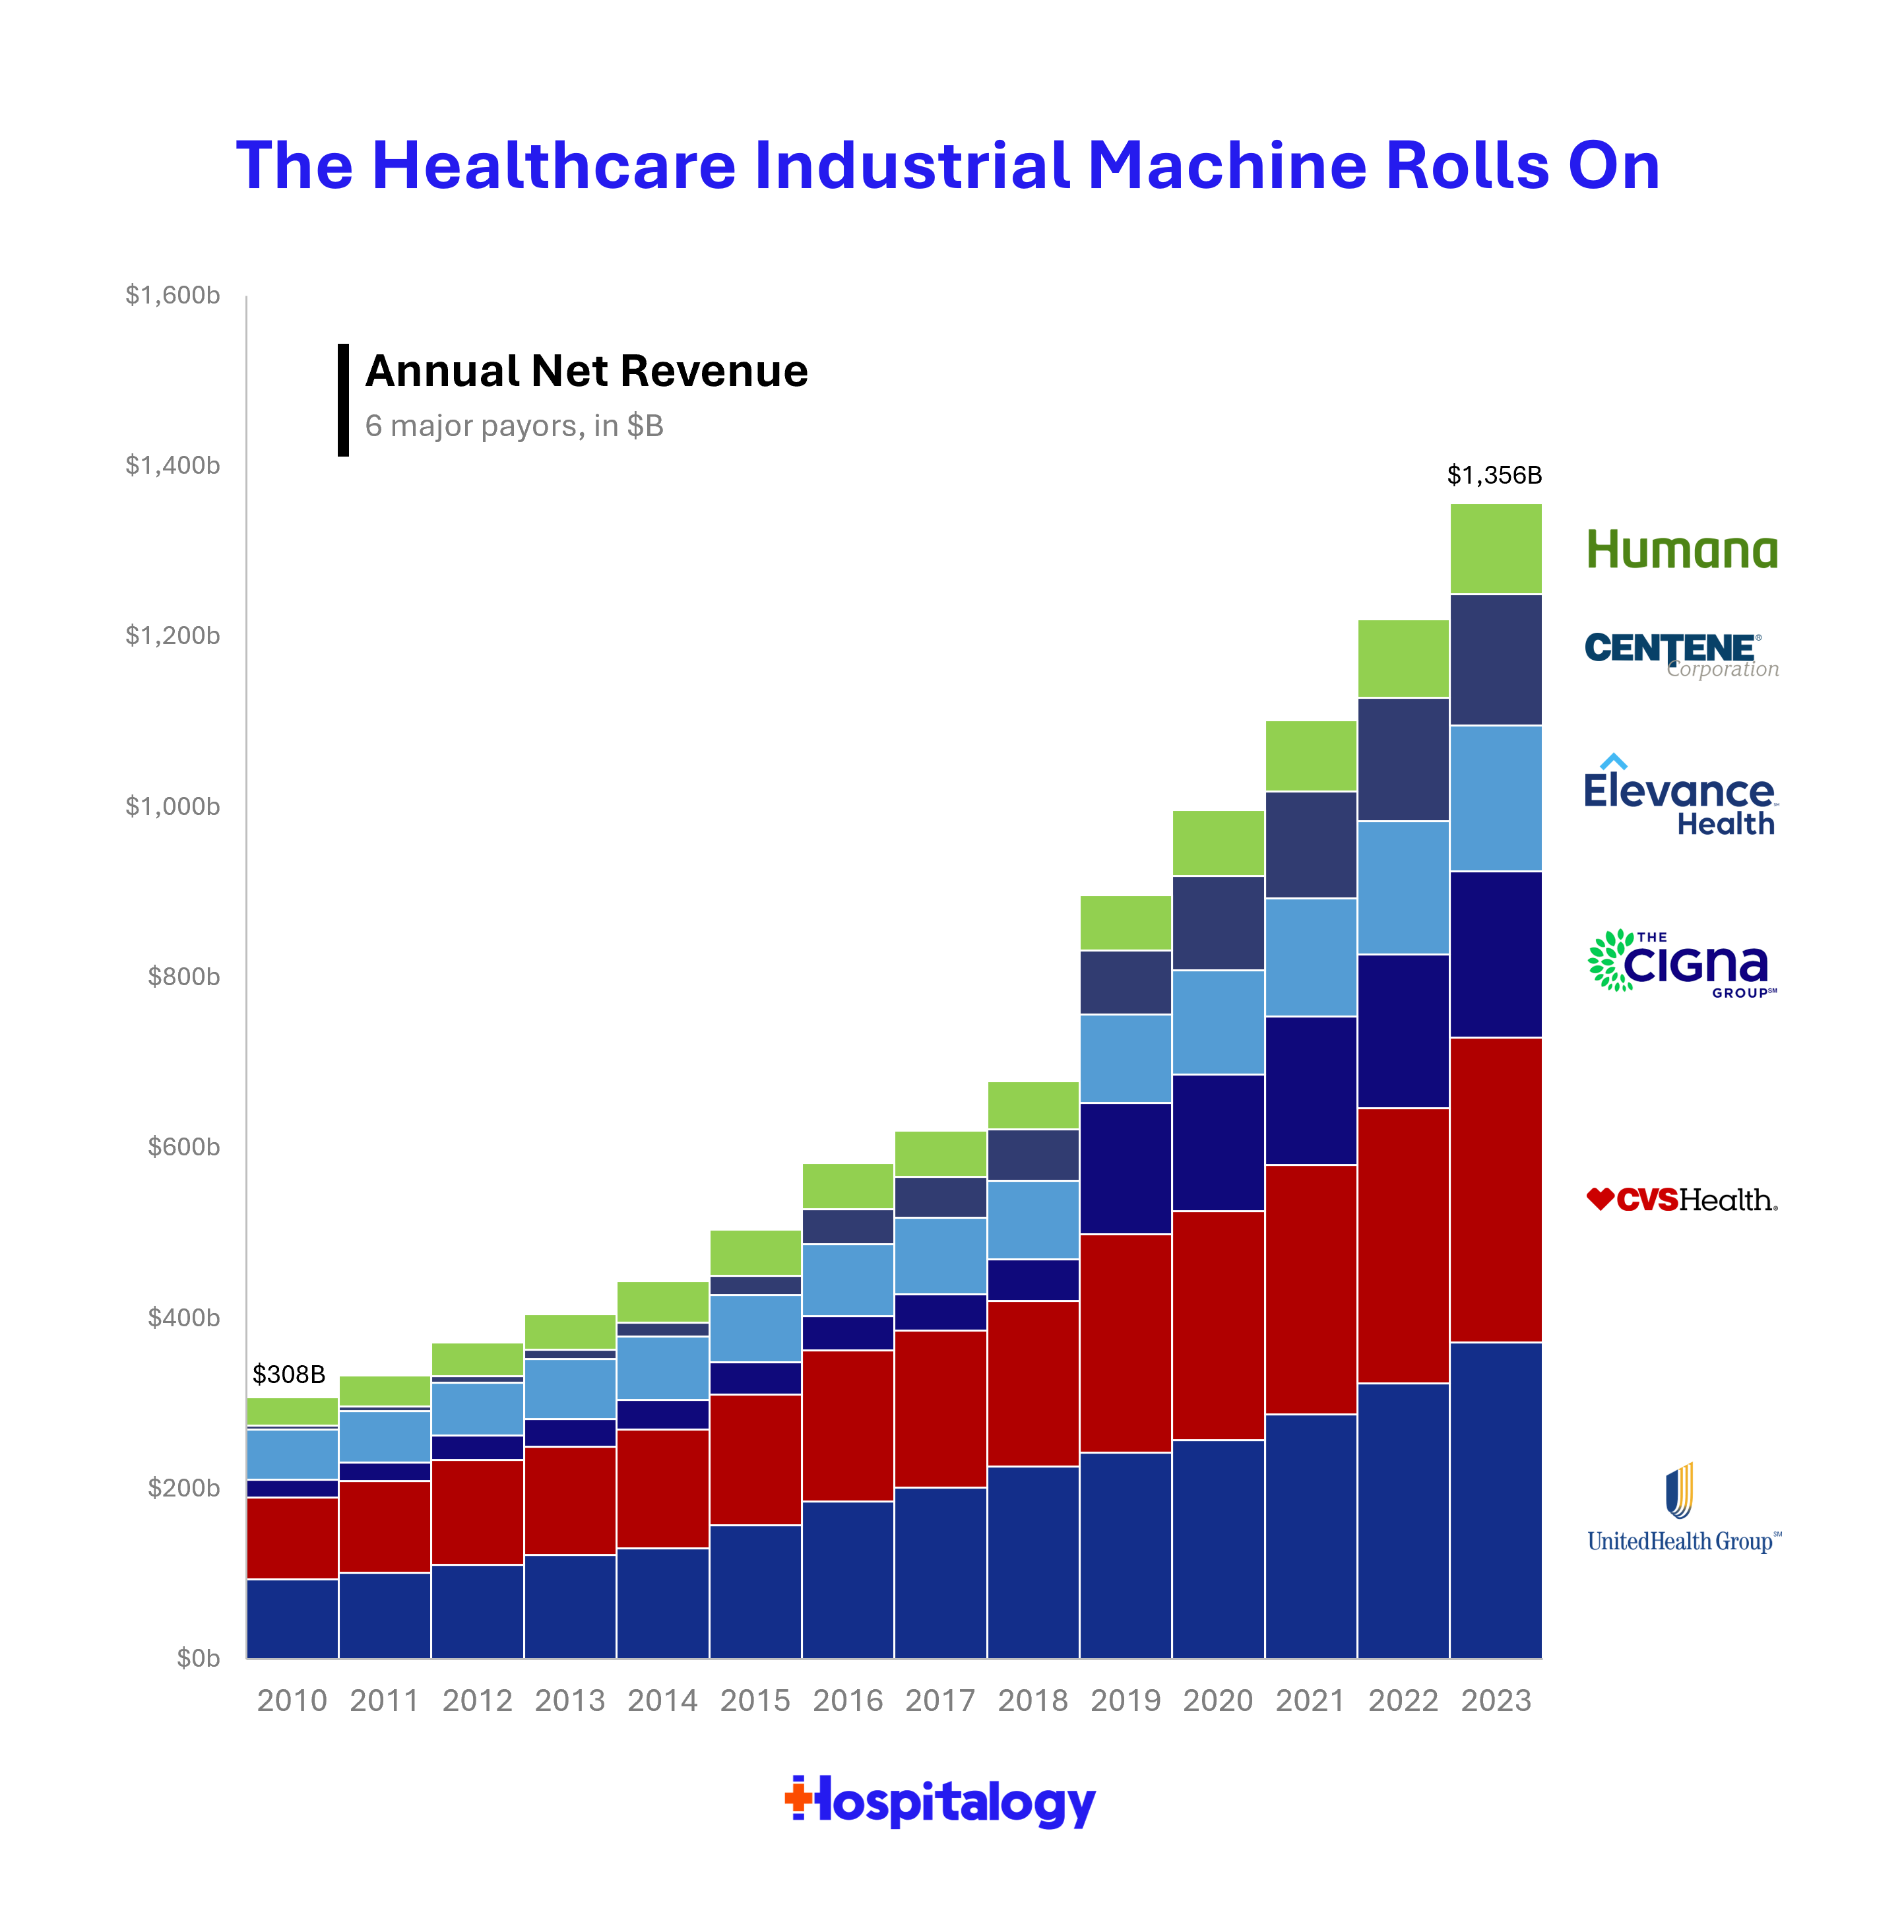 The Healthcare Industrial Machine Rolls on: Analyzing 13 Years of Health Insurer Revenue Growth